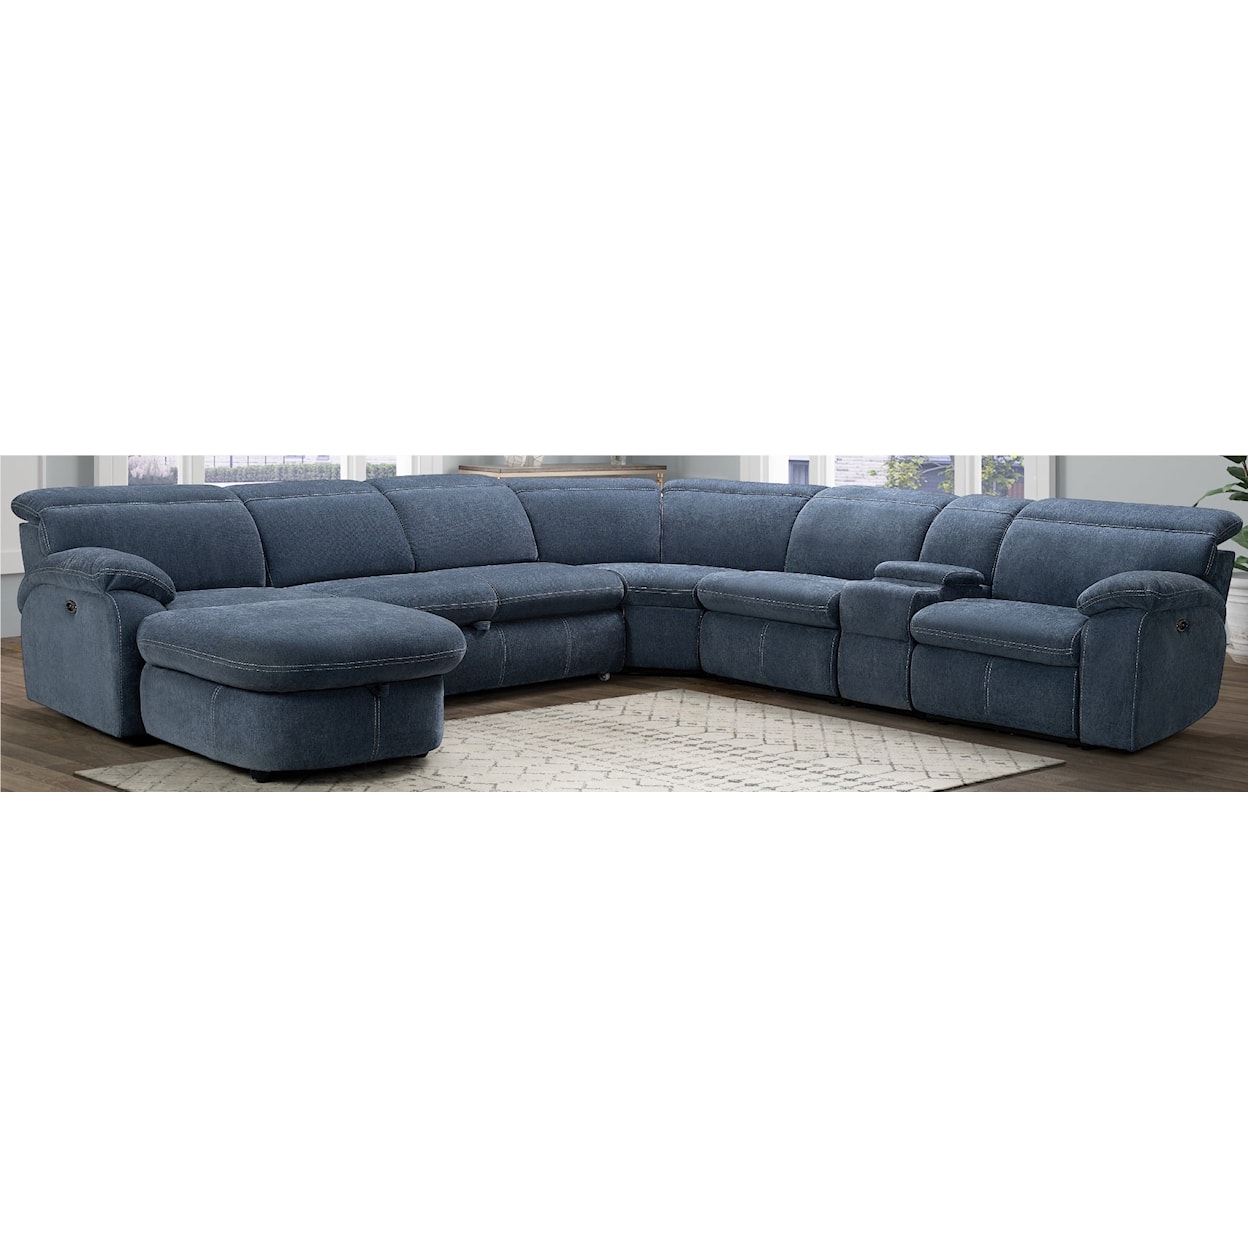 Vogue Home Furnishings PX3002 Dove Sectional PX3002 Eclipse Sectional